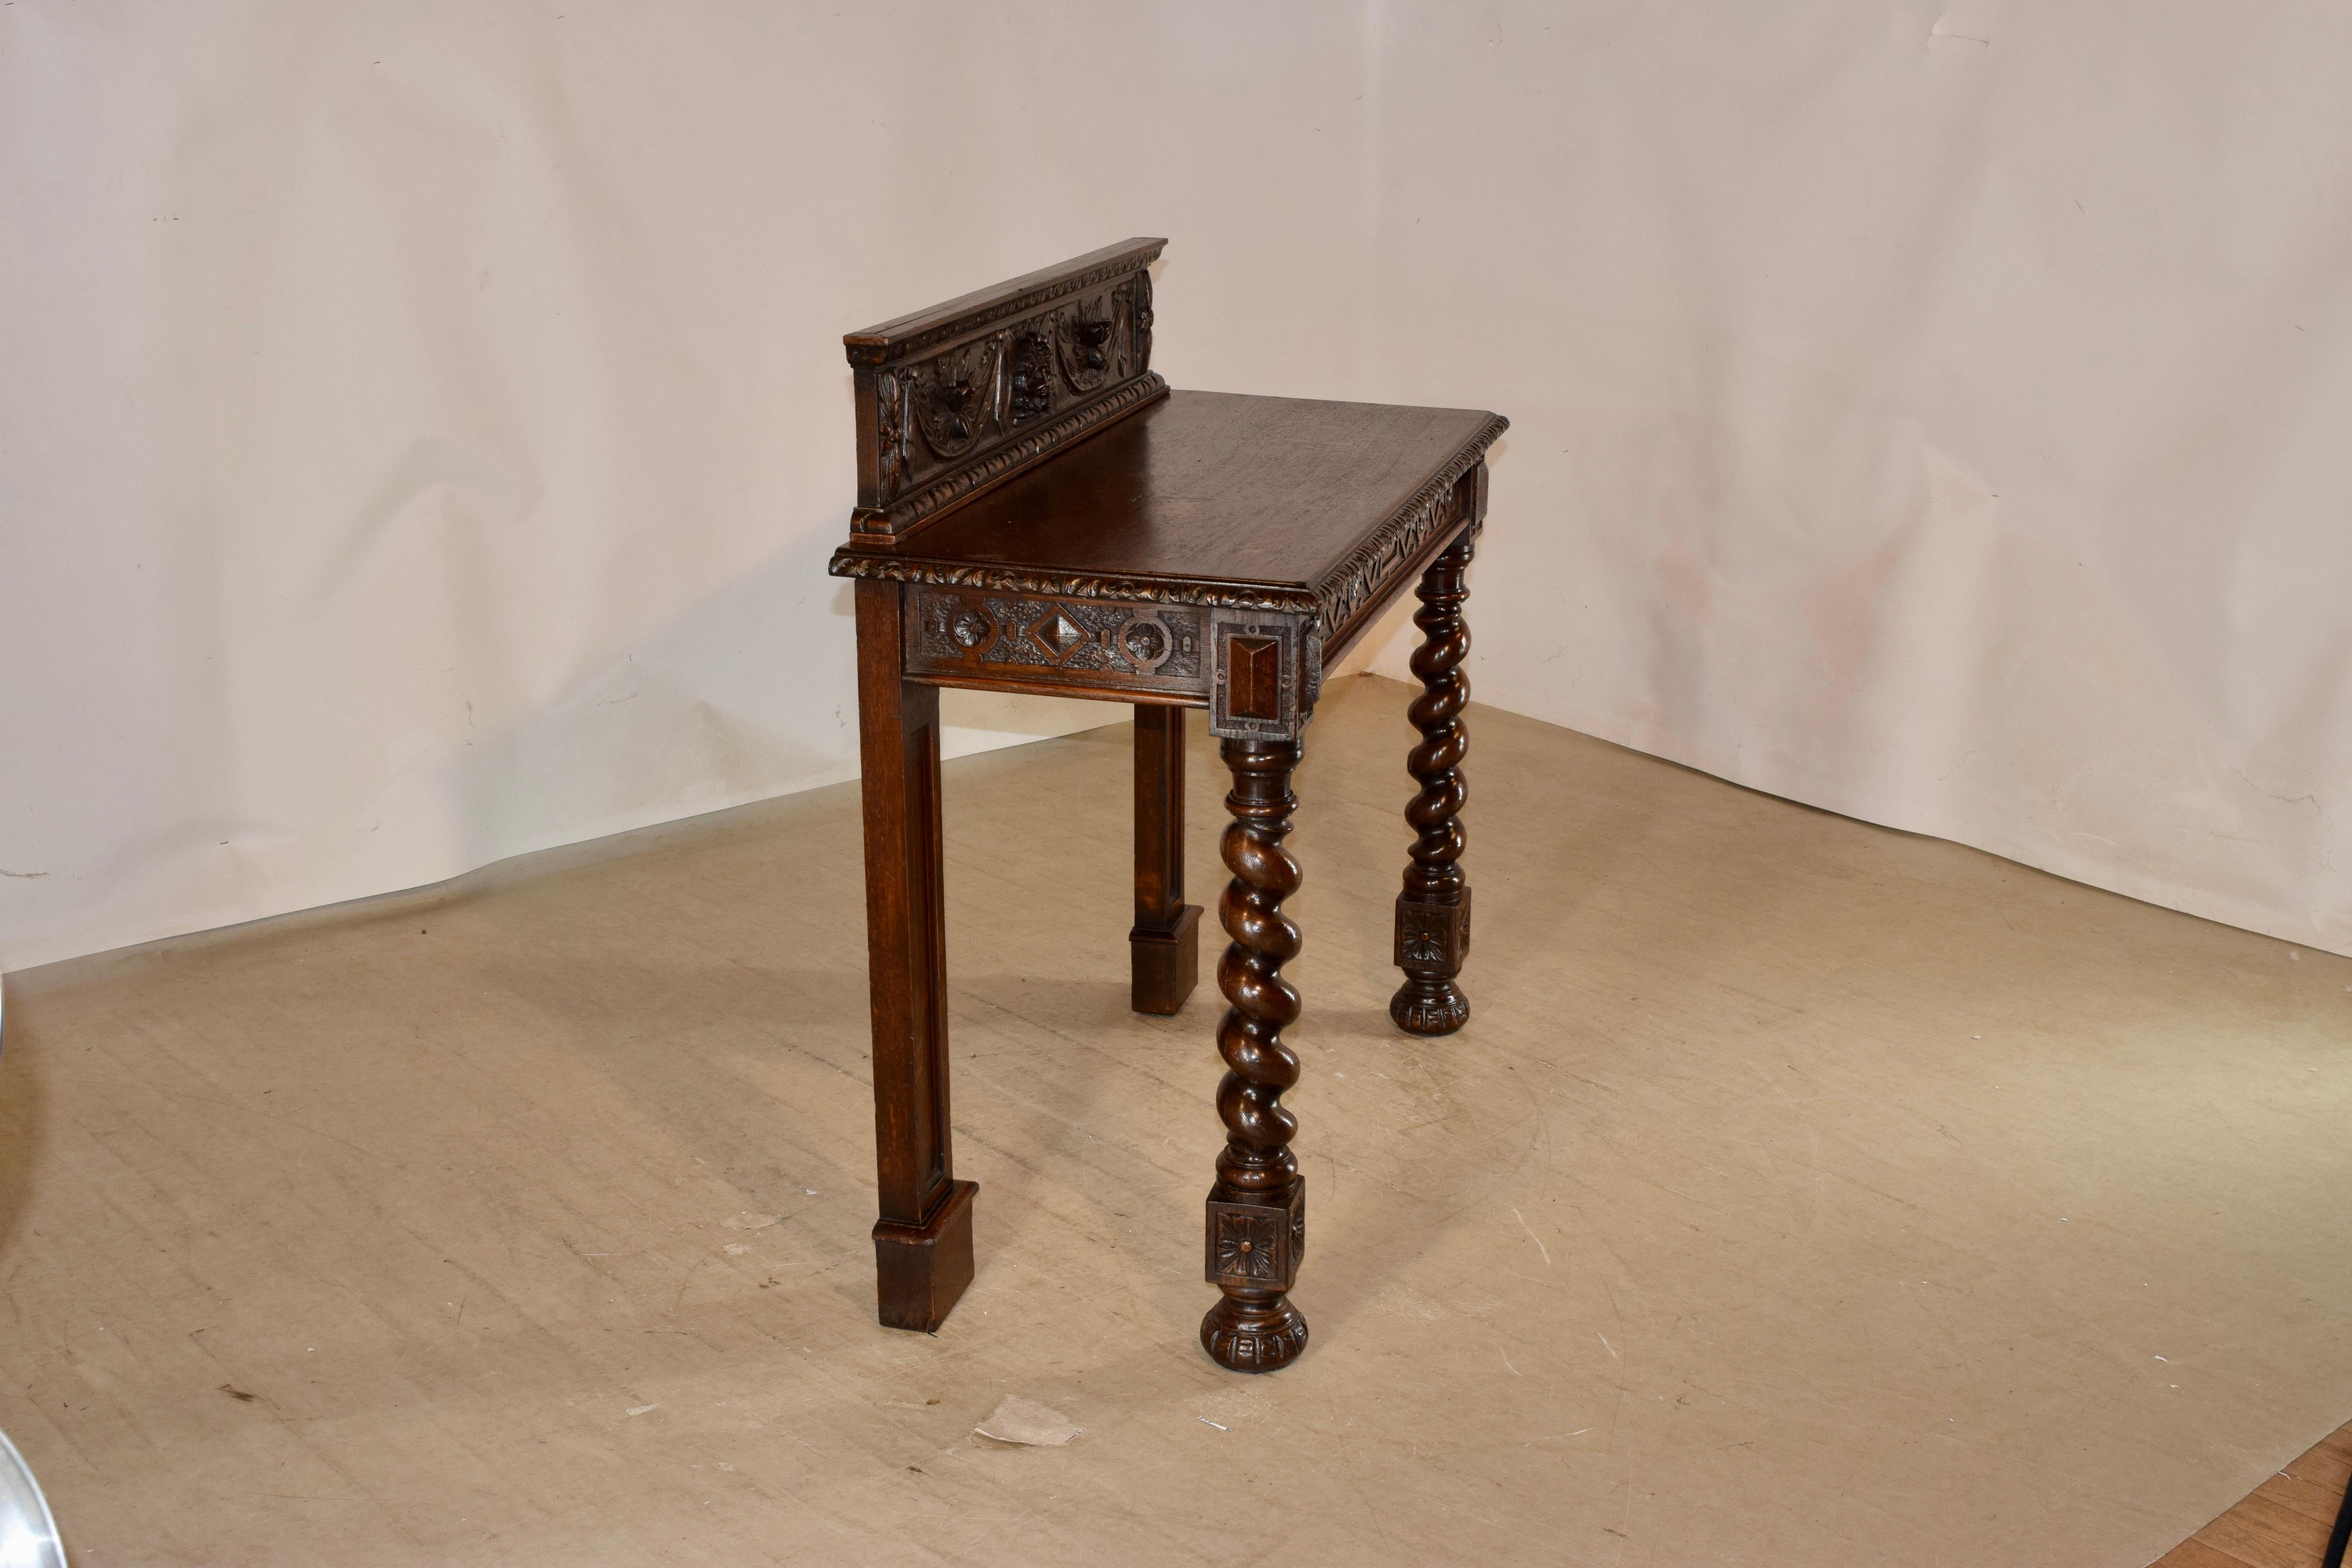 19th century English oak console table with exquisite carving. The table is signed Edwards and Roberts Wardour St London. Edwards and Roberts were one of the premier English furniture makers in the 19th century. the backsplash is expertly hand